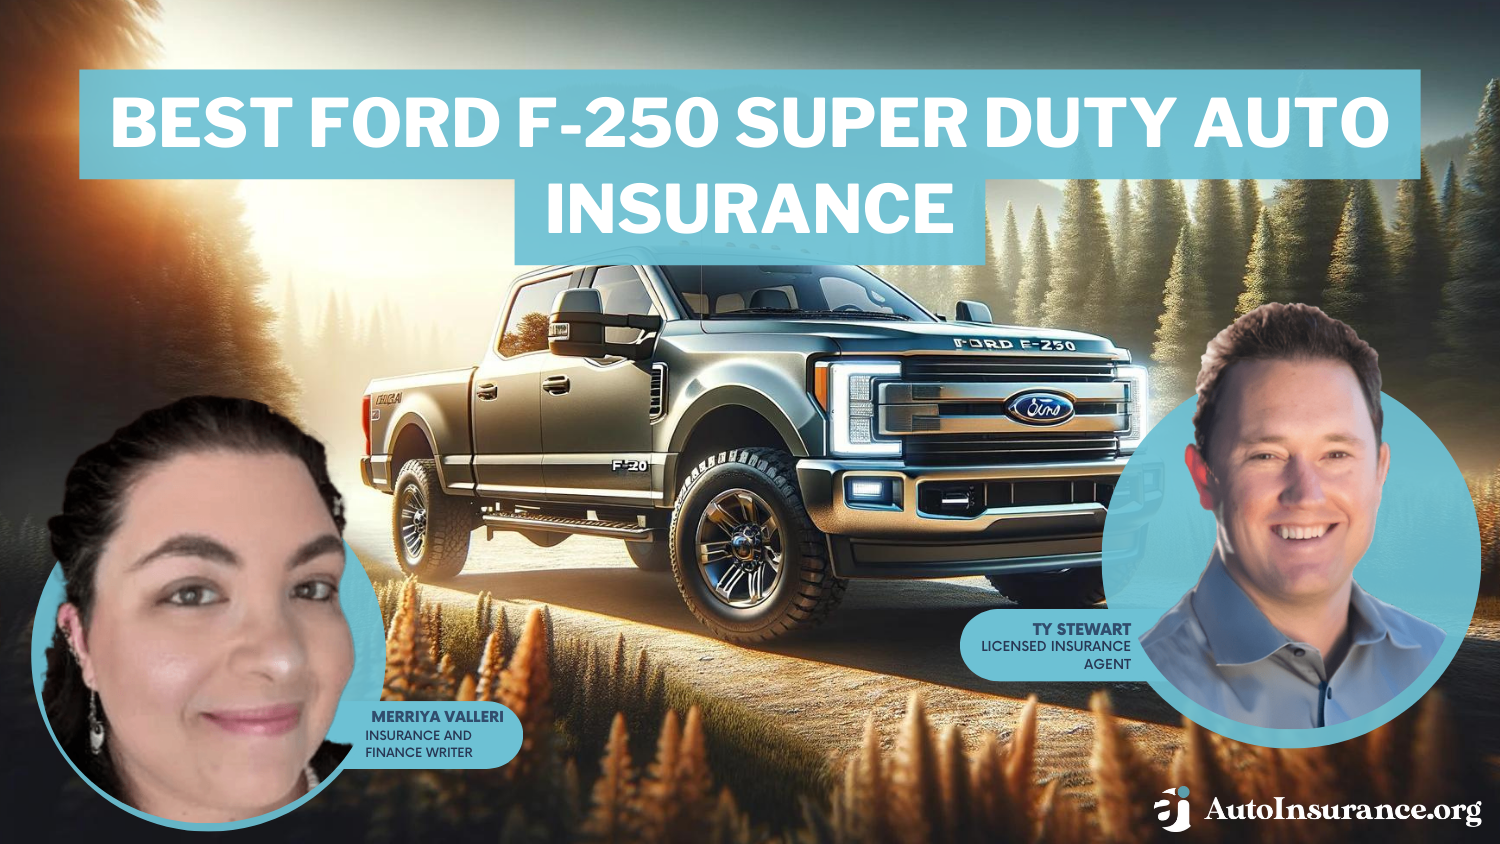 Best Ford F-250 Super Duty Auto Insurance: State Farm, USAA, and Geico.